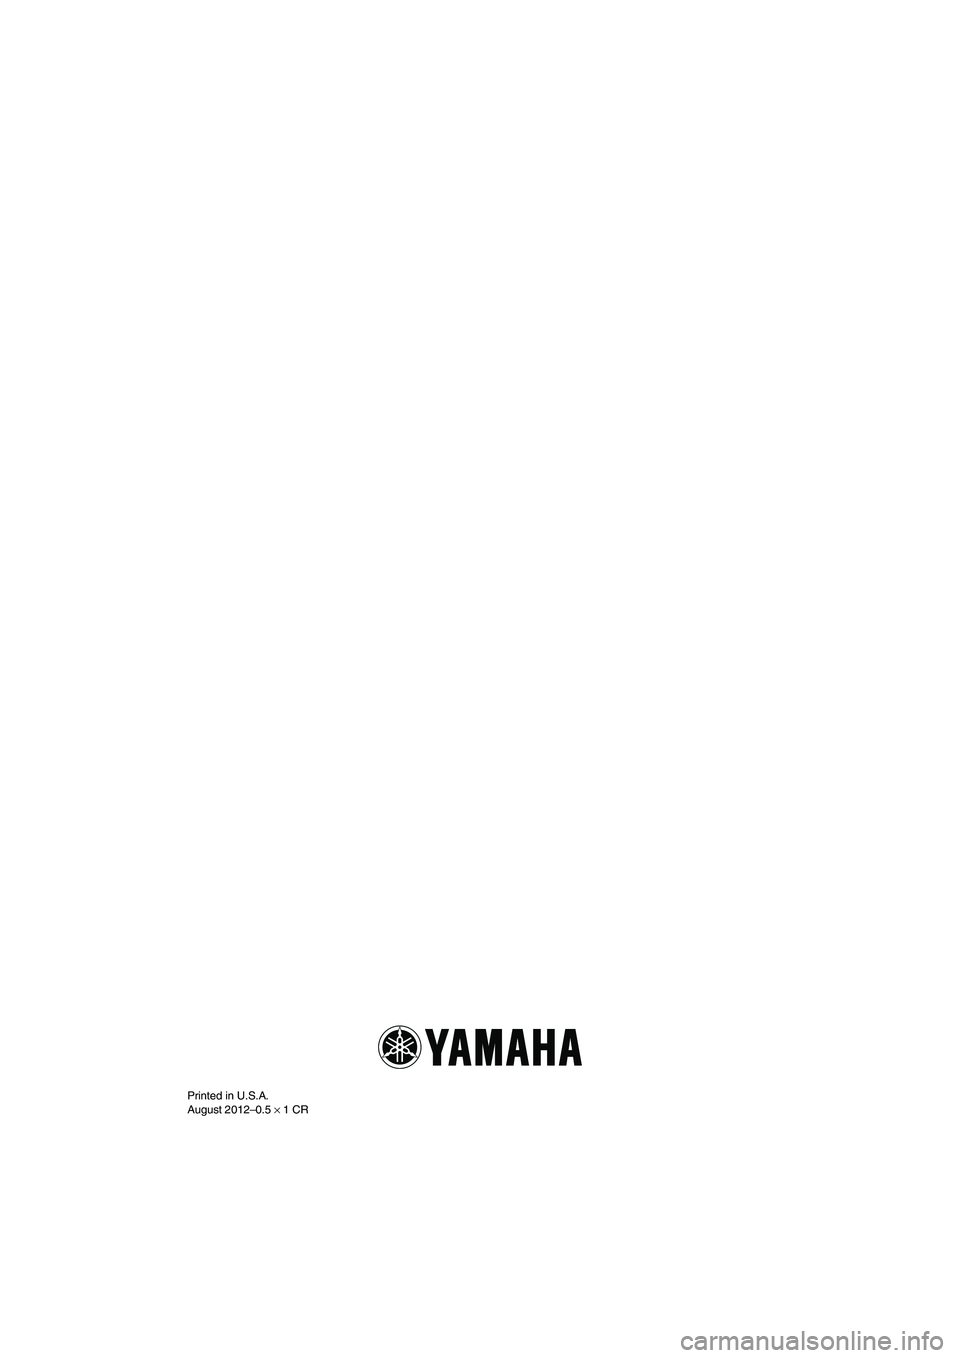 YAMAHA VX SPORT 2013  Owners Manual Printed in U.S.A.
August 2012–0.5 × 1 CR
UF2P70E0.book  Page 1  Tuesday, July 31, 2012  1:48 PM 